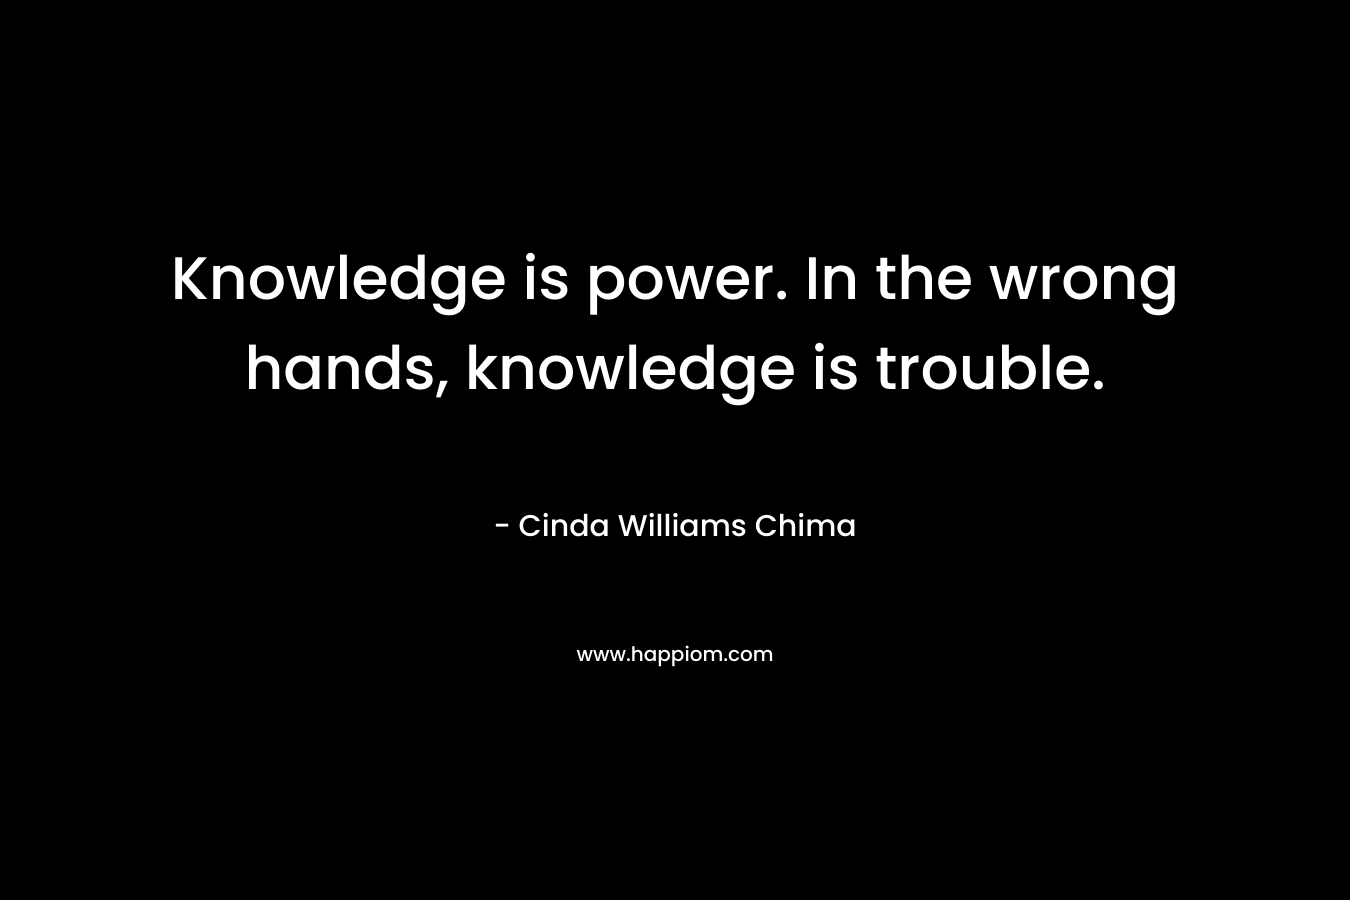 Knowledge is power. In the wrong hands, knowledge is trouble.